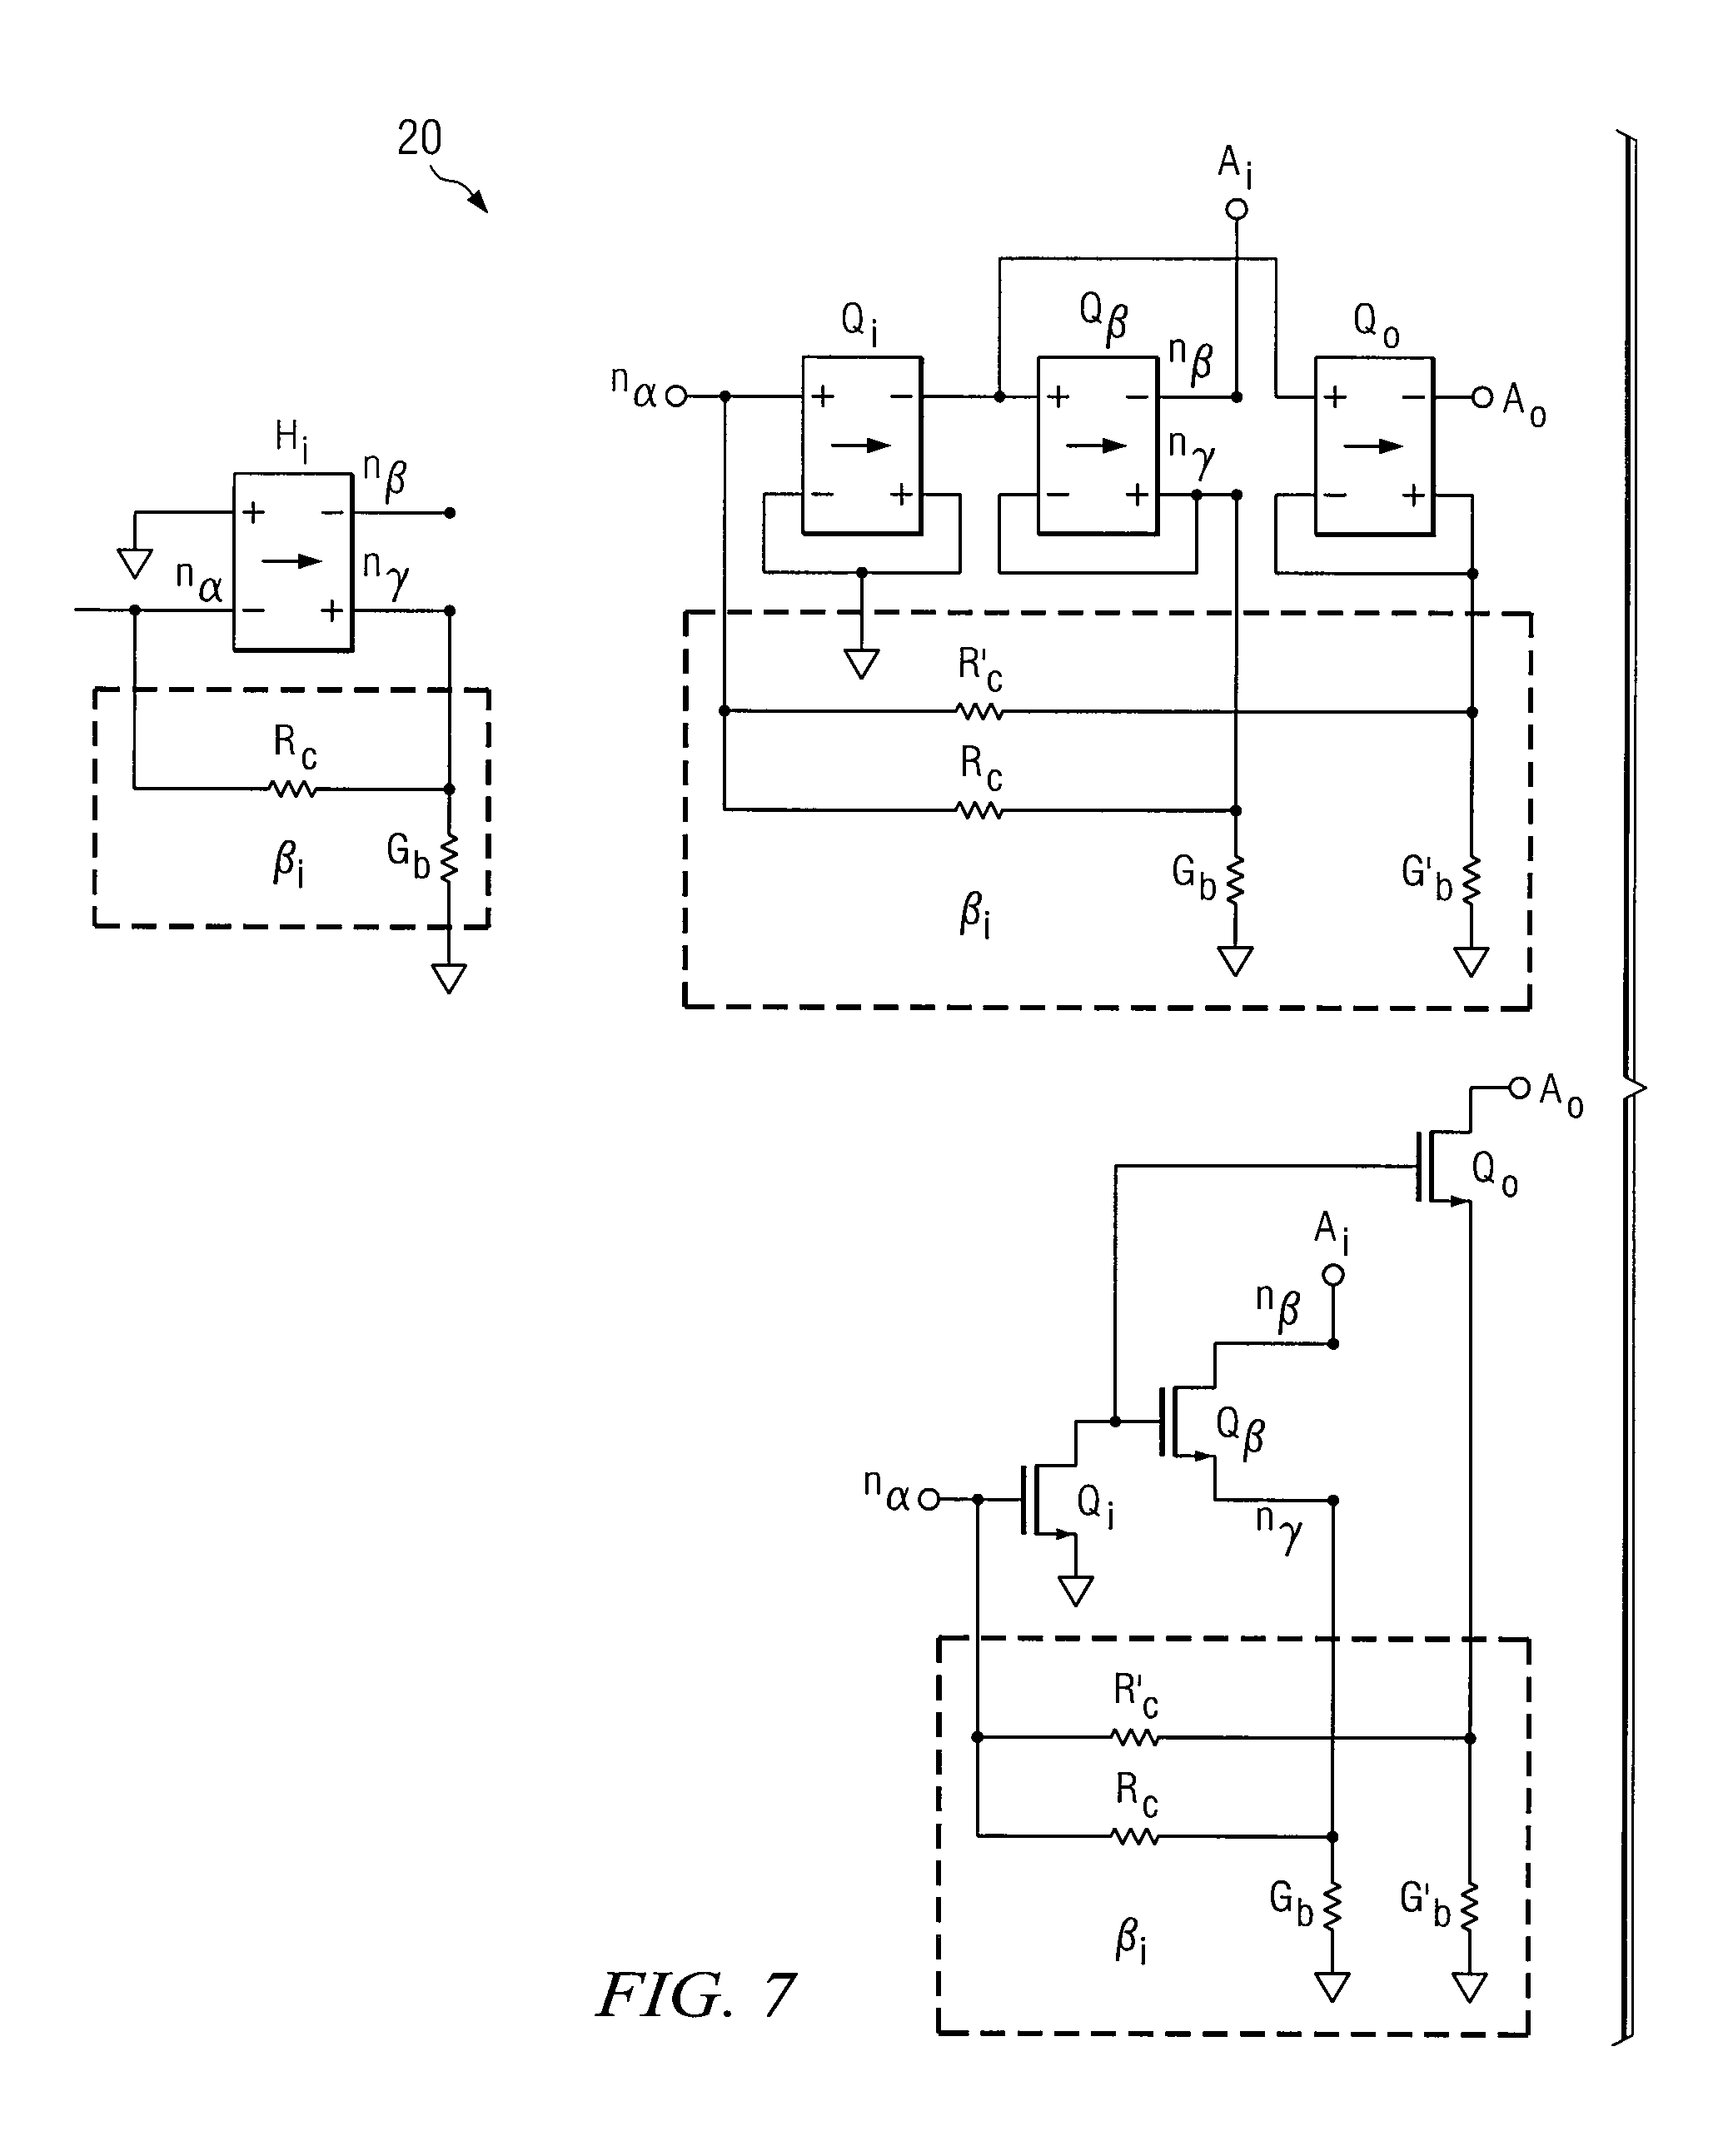 System and method for providing a configurable inductor less multi-stage low-noise amplifier